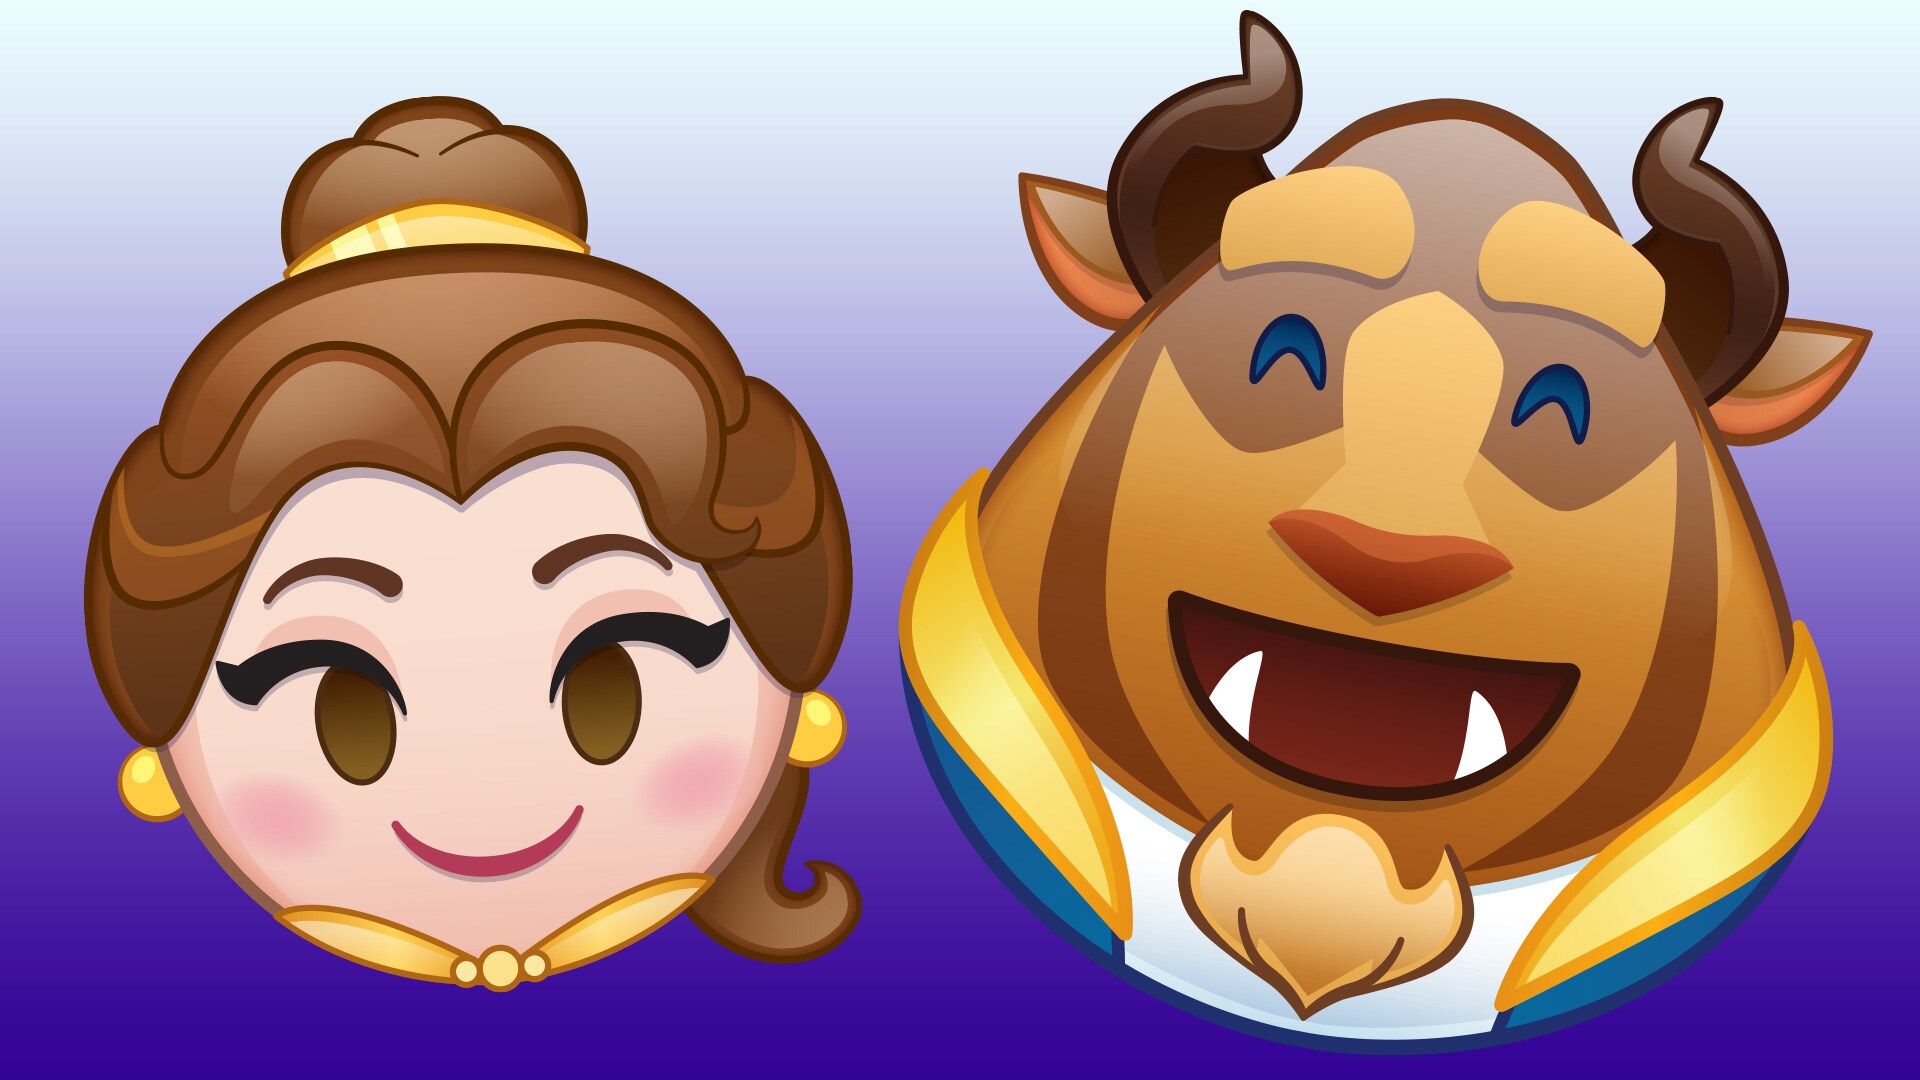 Beauty and the Beast As Told by Emoji